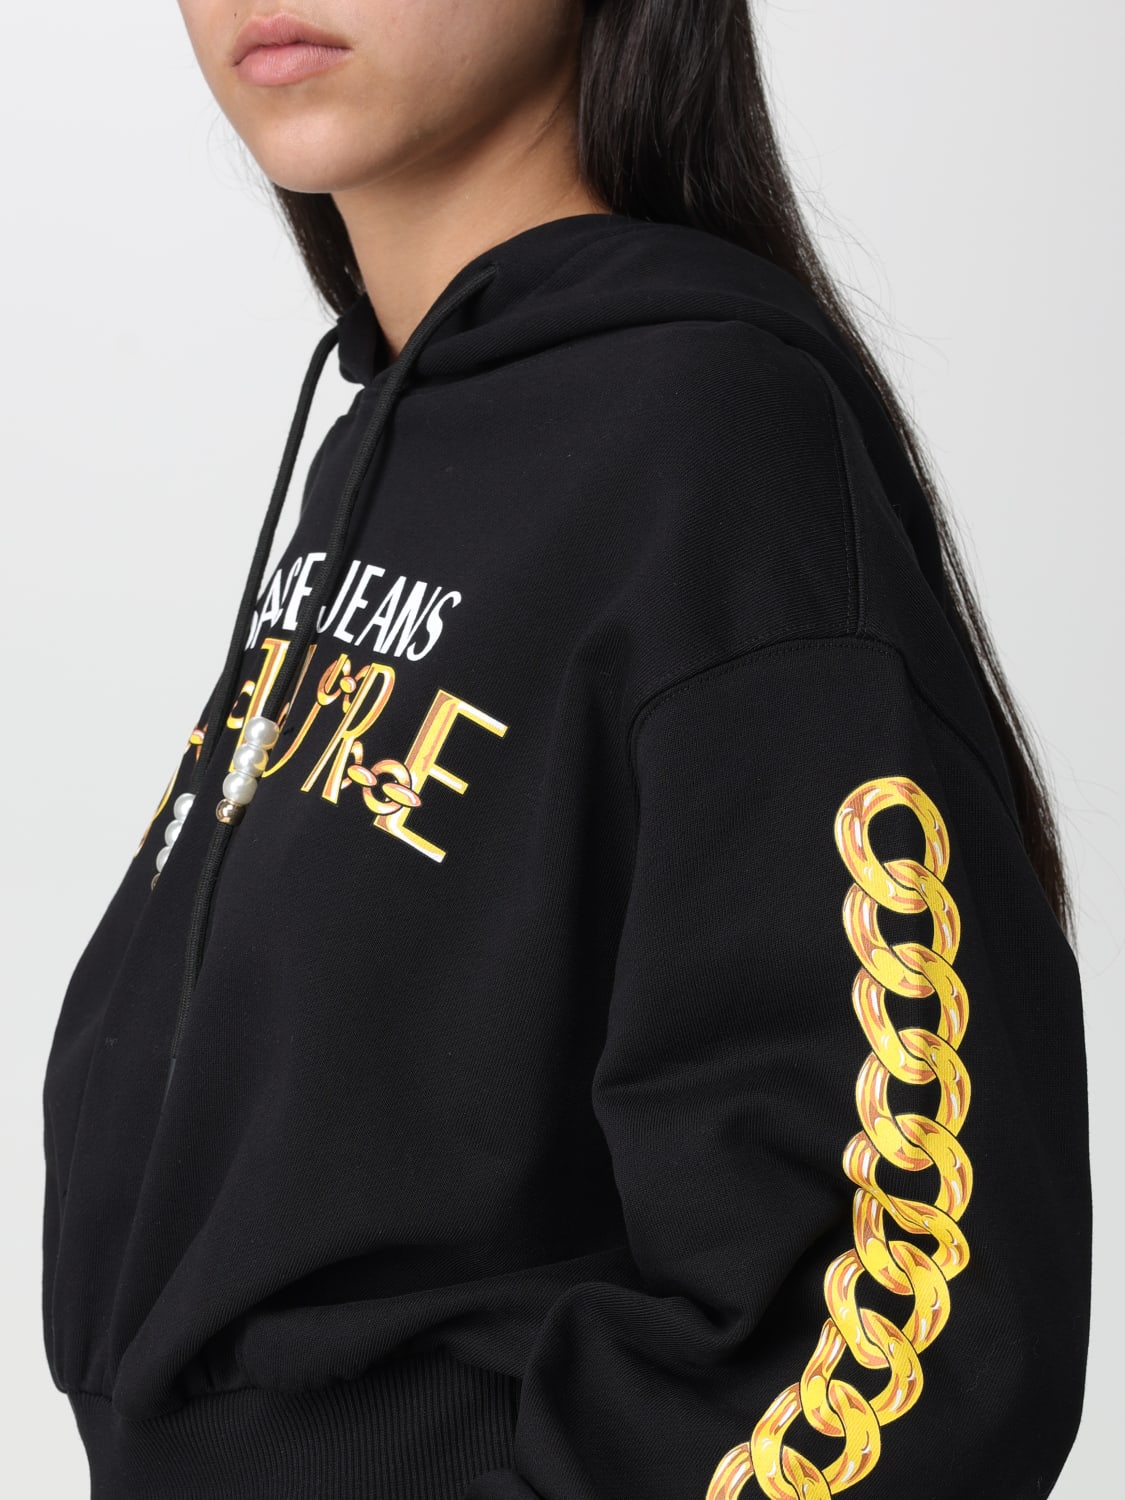 Versace Jeans Couture Chain Couture Hoodie